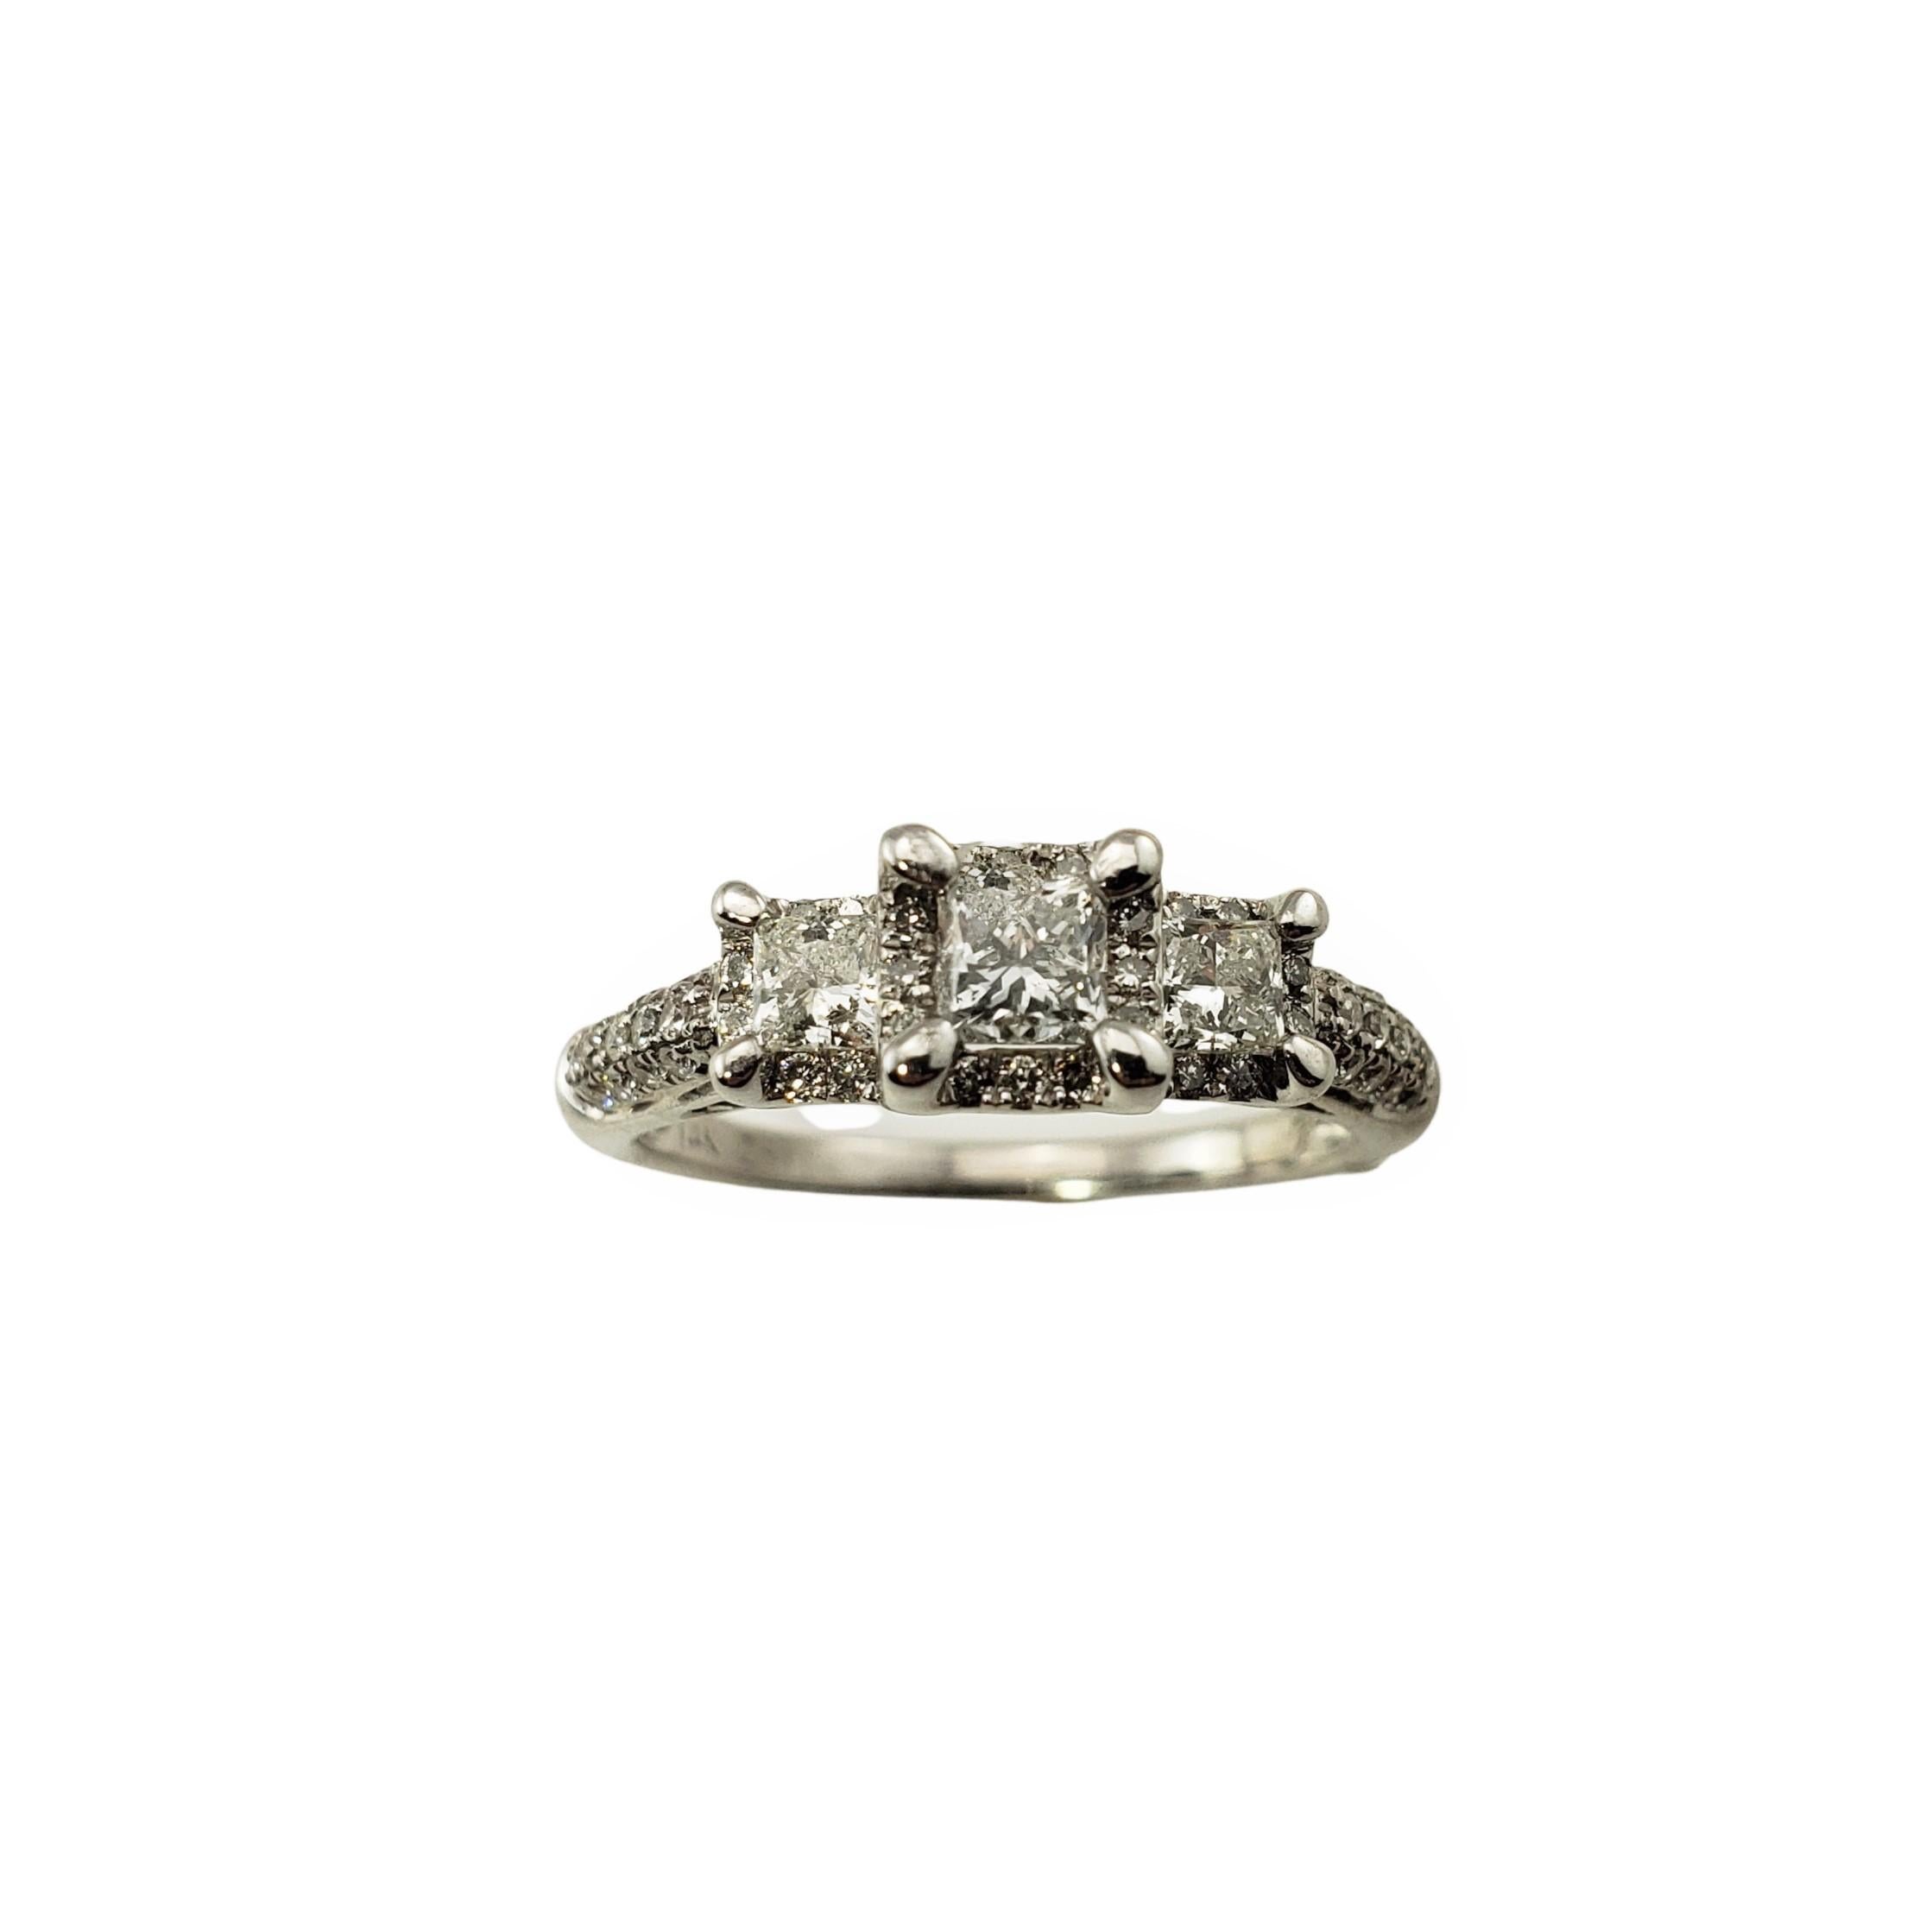 14 Karat White Gold Diamond Engagement Ring Size 8.75-

This sparkling ring features three princess cut diamonds (center: .25 ct.) and 49 round brilliant cut diamonds on the band set in beautifully detailed 14K white gold.  Shank:  1.5